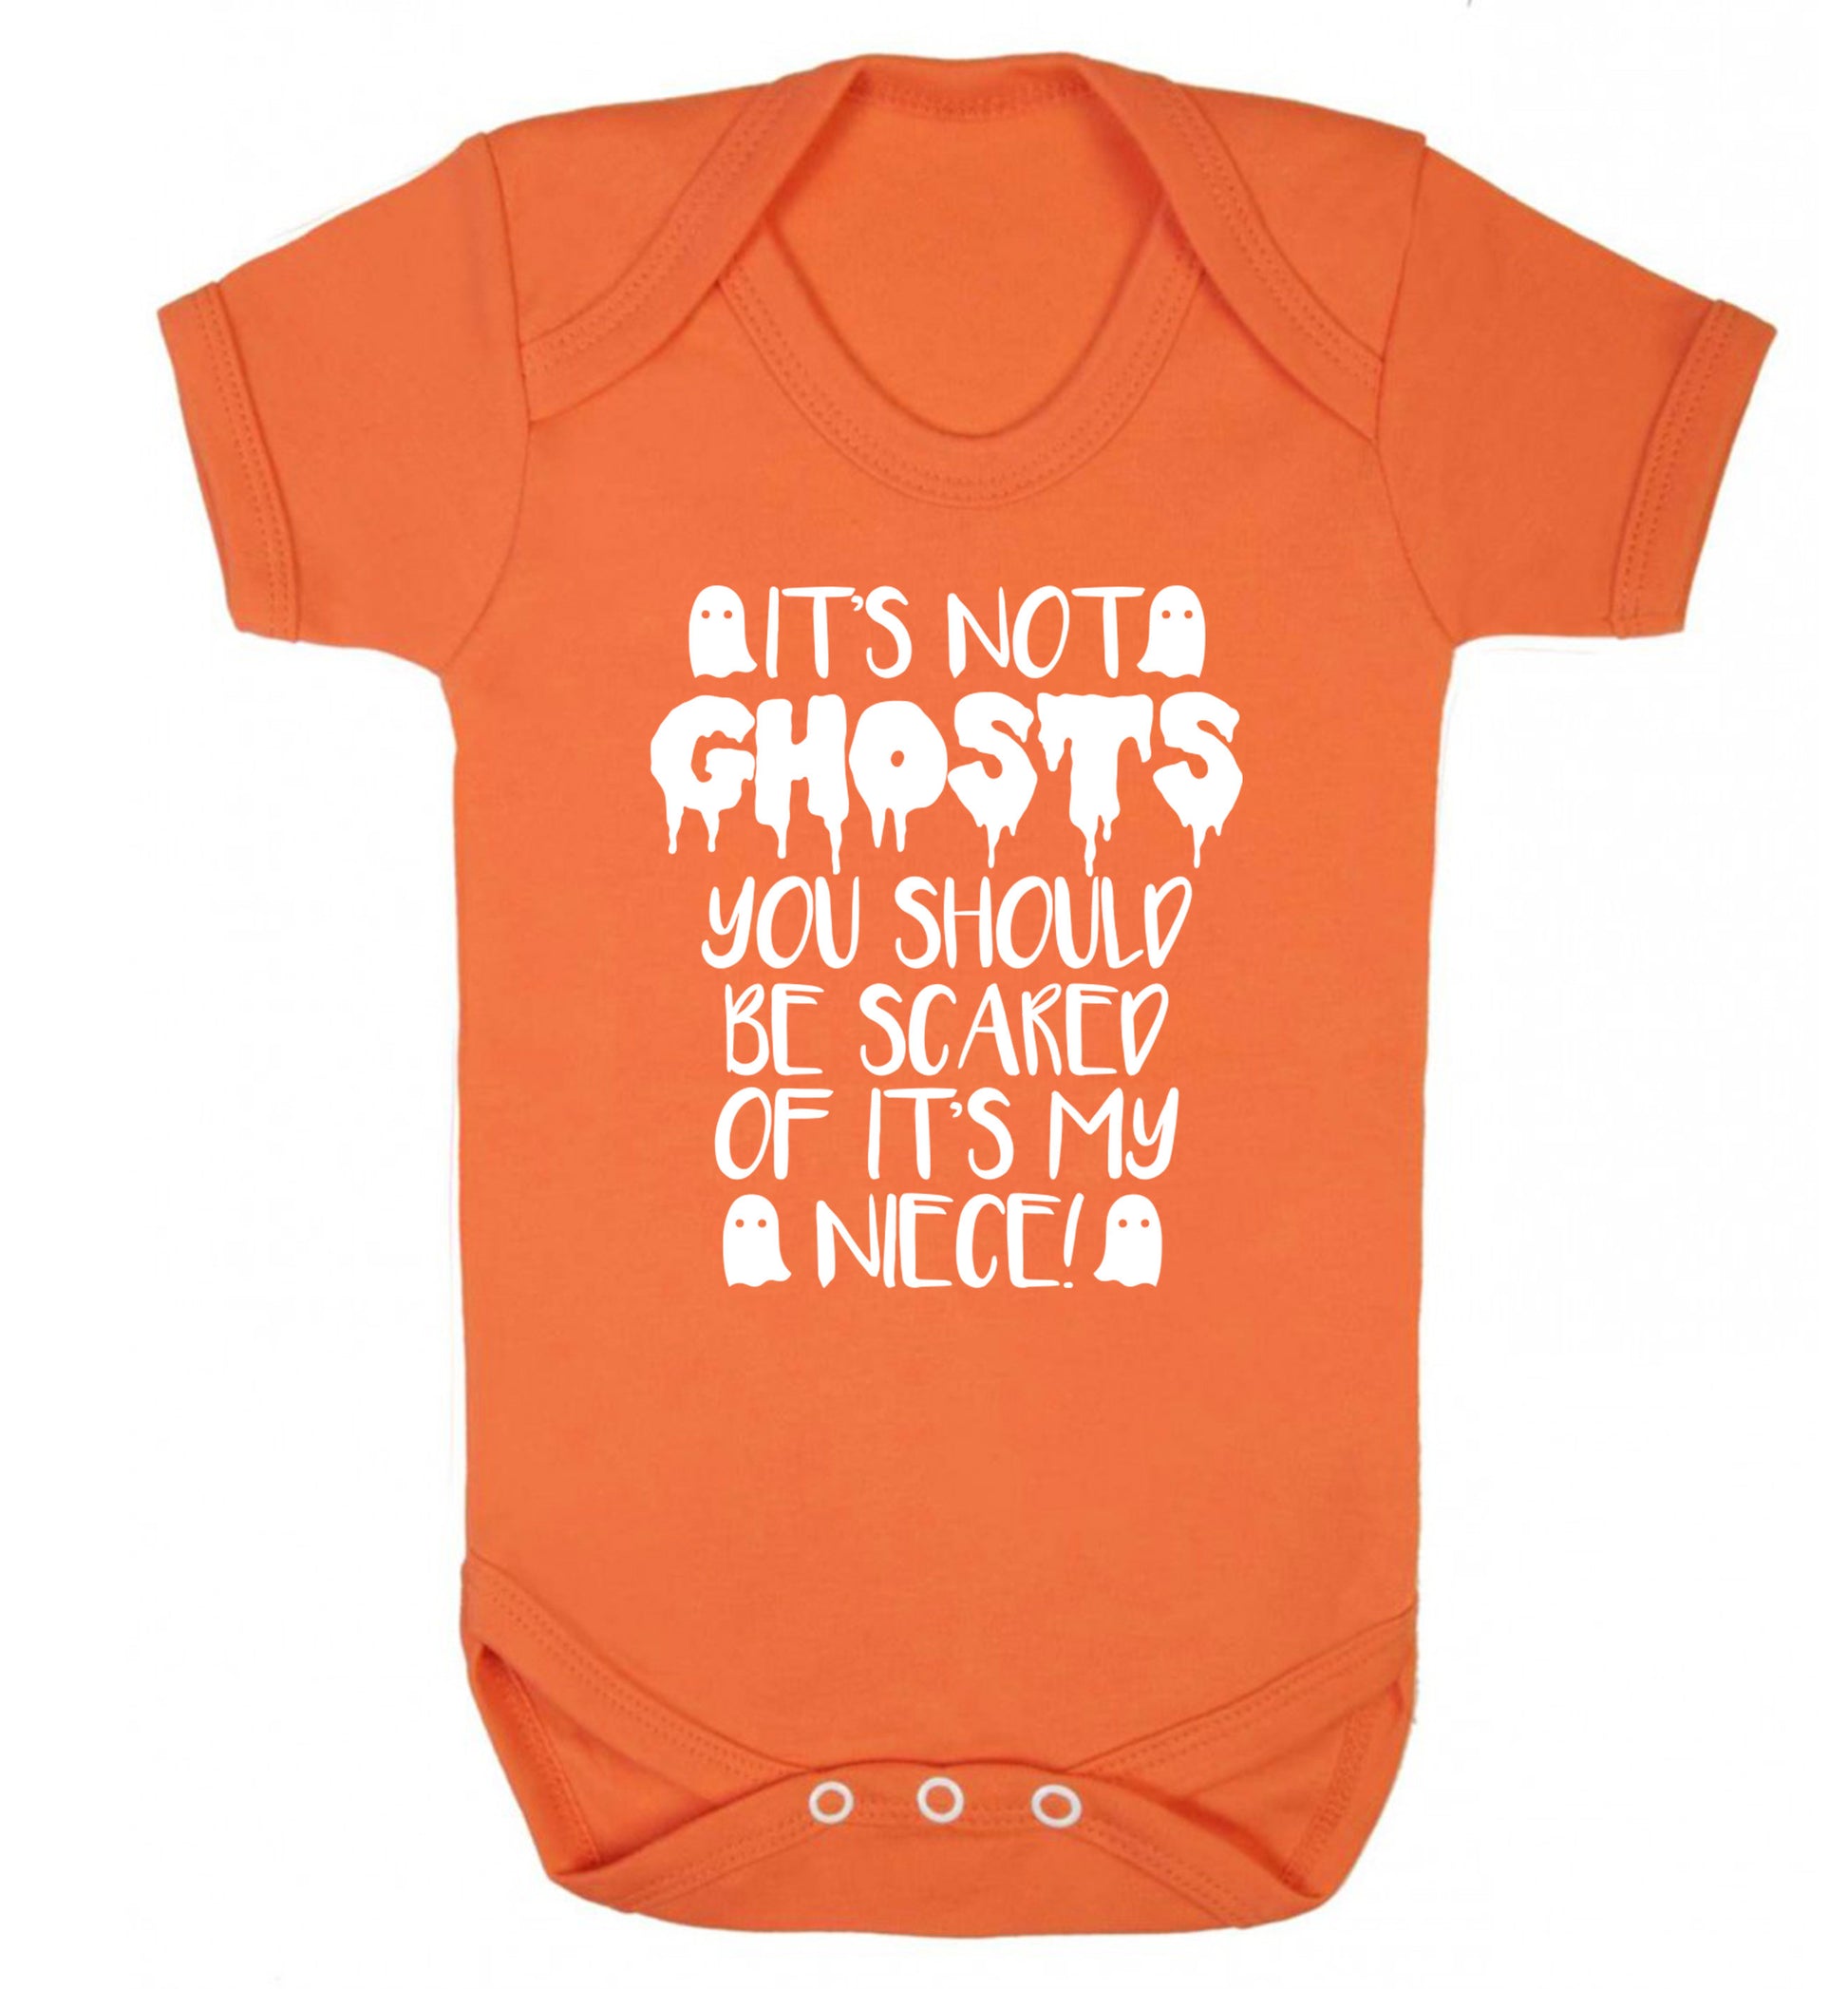 It's not ghosts you should be scared of it's my niece! Baby Vest orange 18-24 months